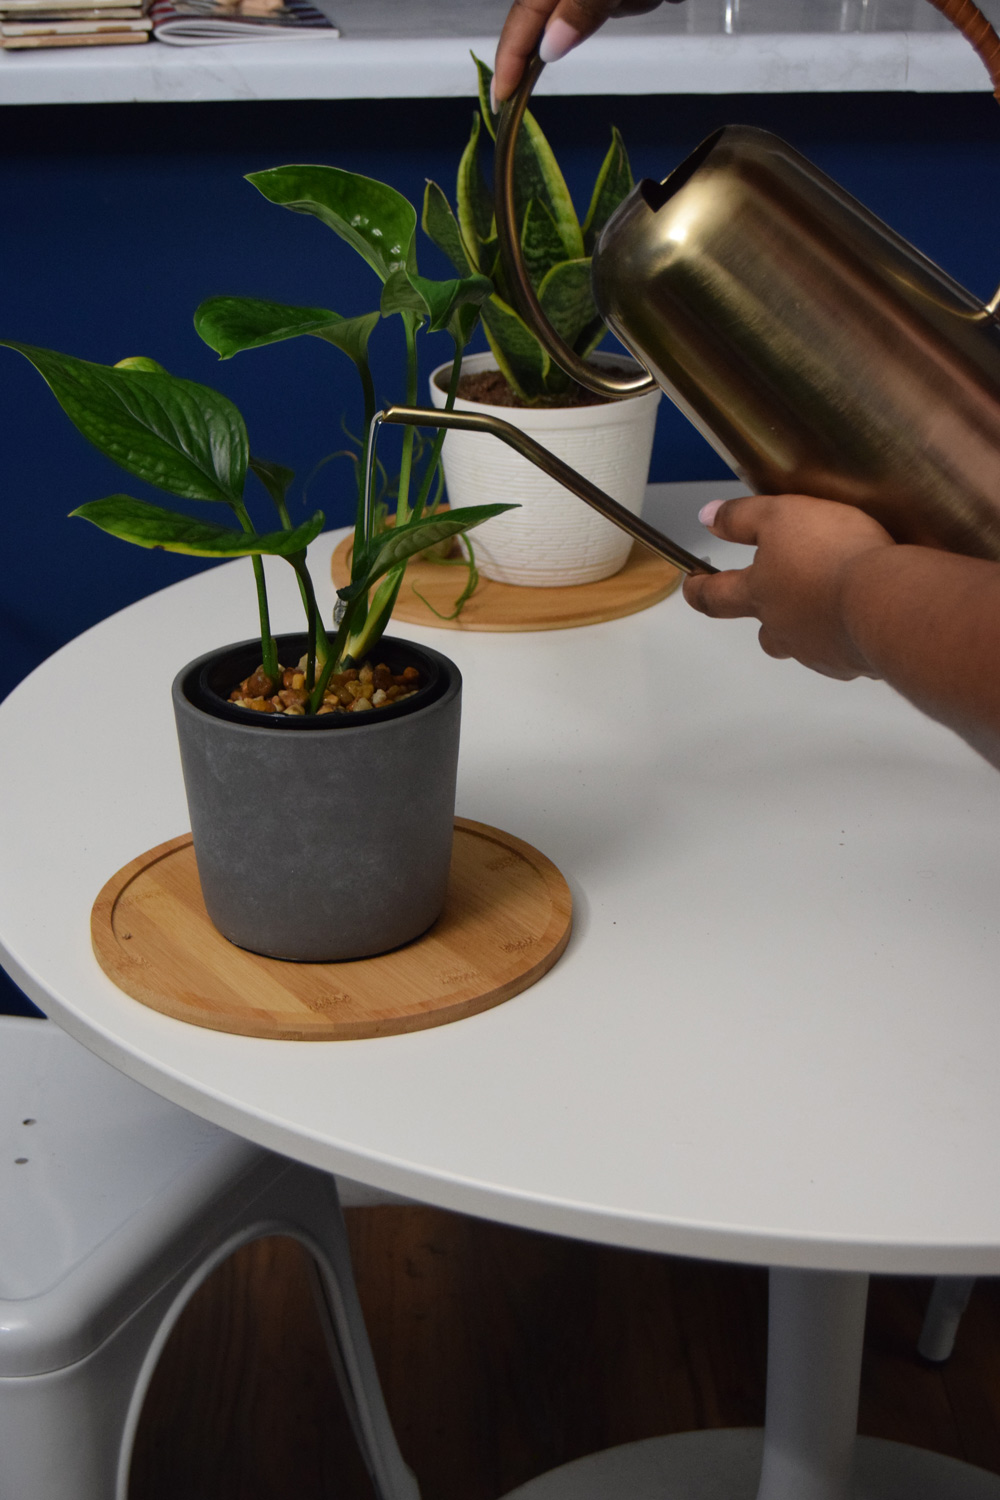 A woman’s hands using a golden watering can to water a potted plant.